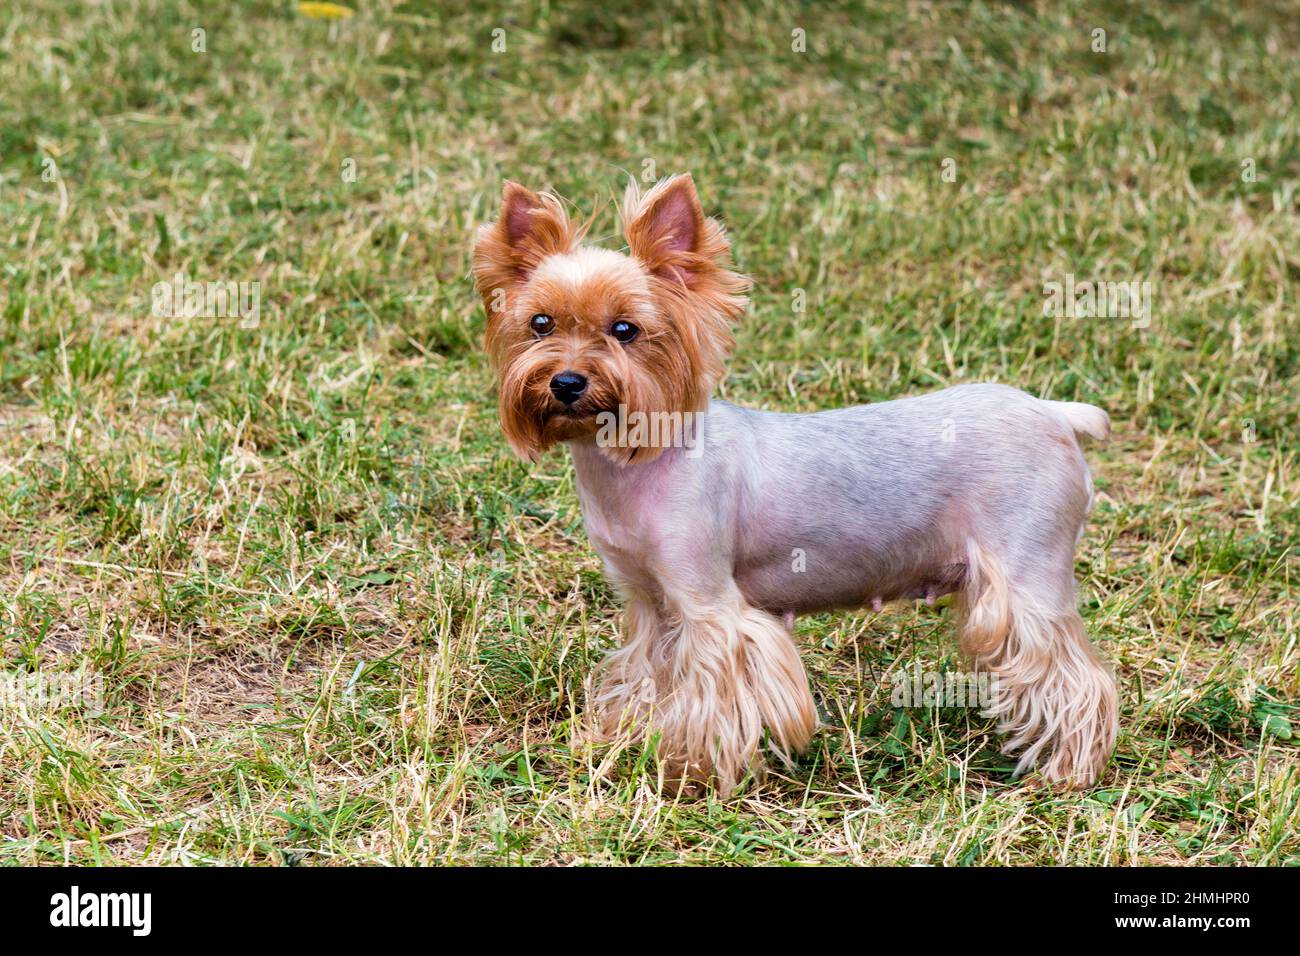 Yorkshire Terrier stands. The Yorkshire Terrier is on the grass. Stock Photo